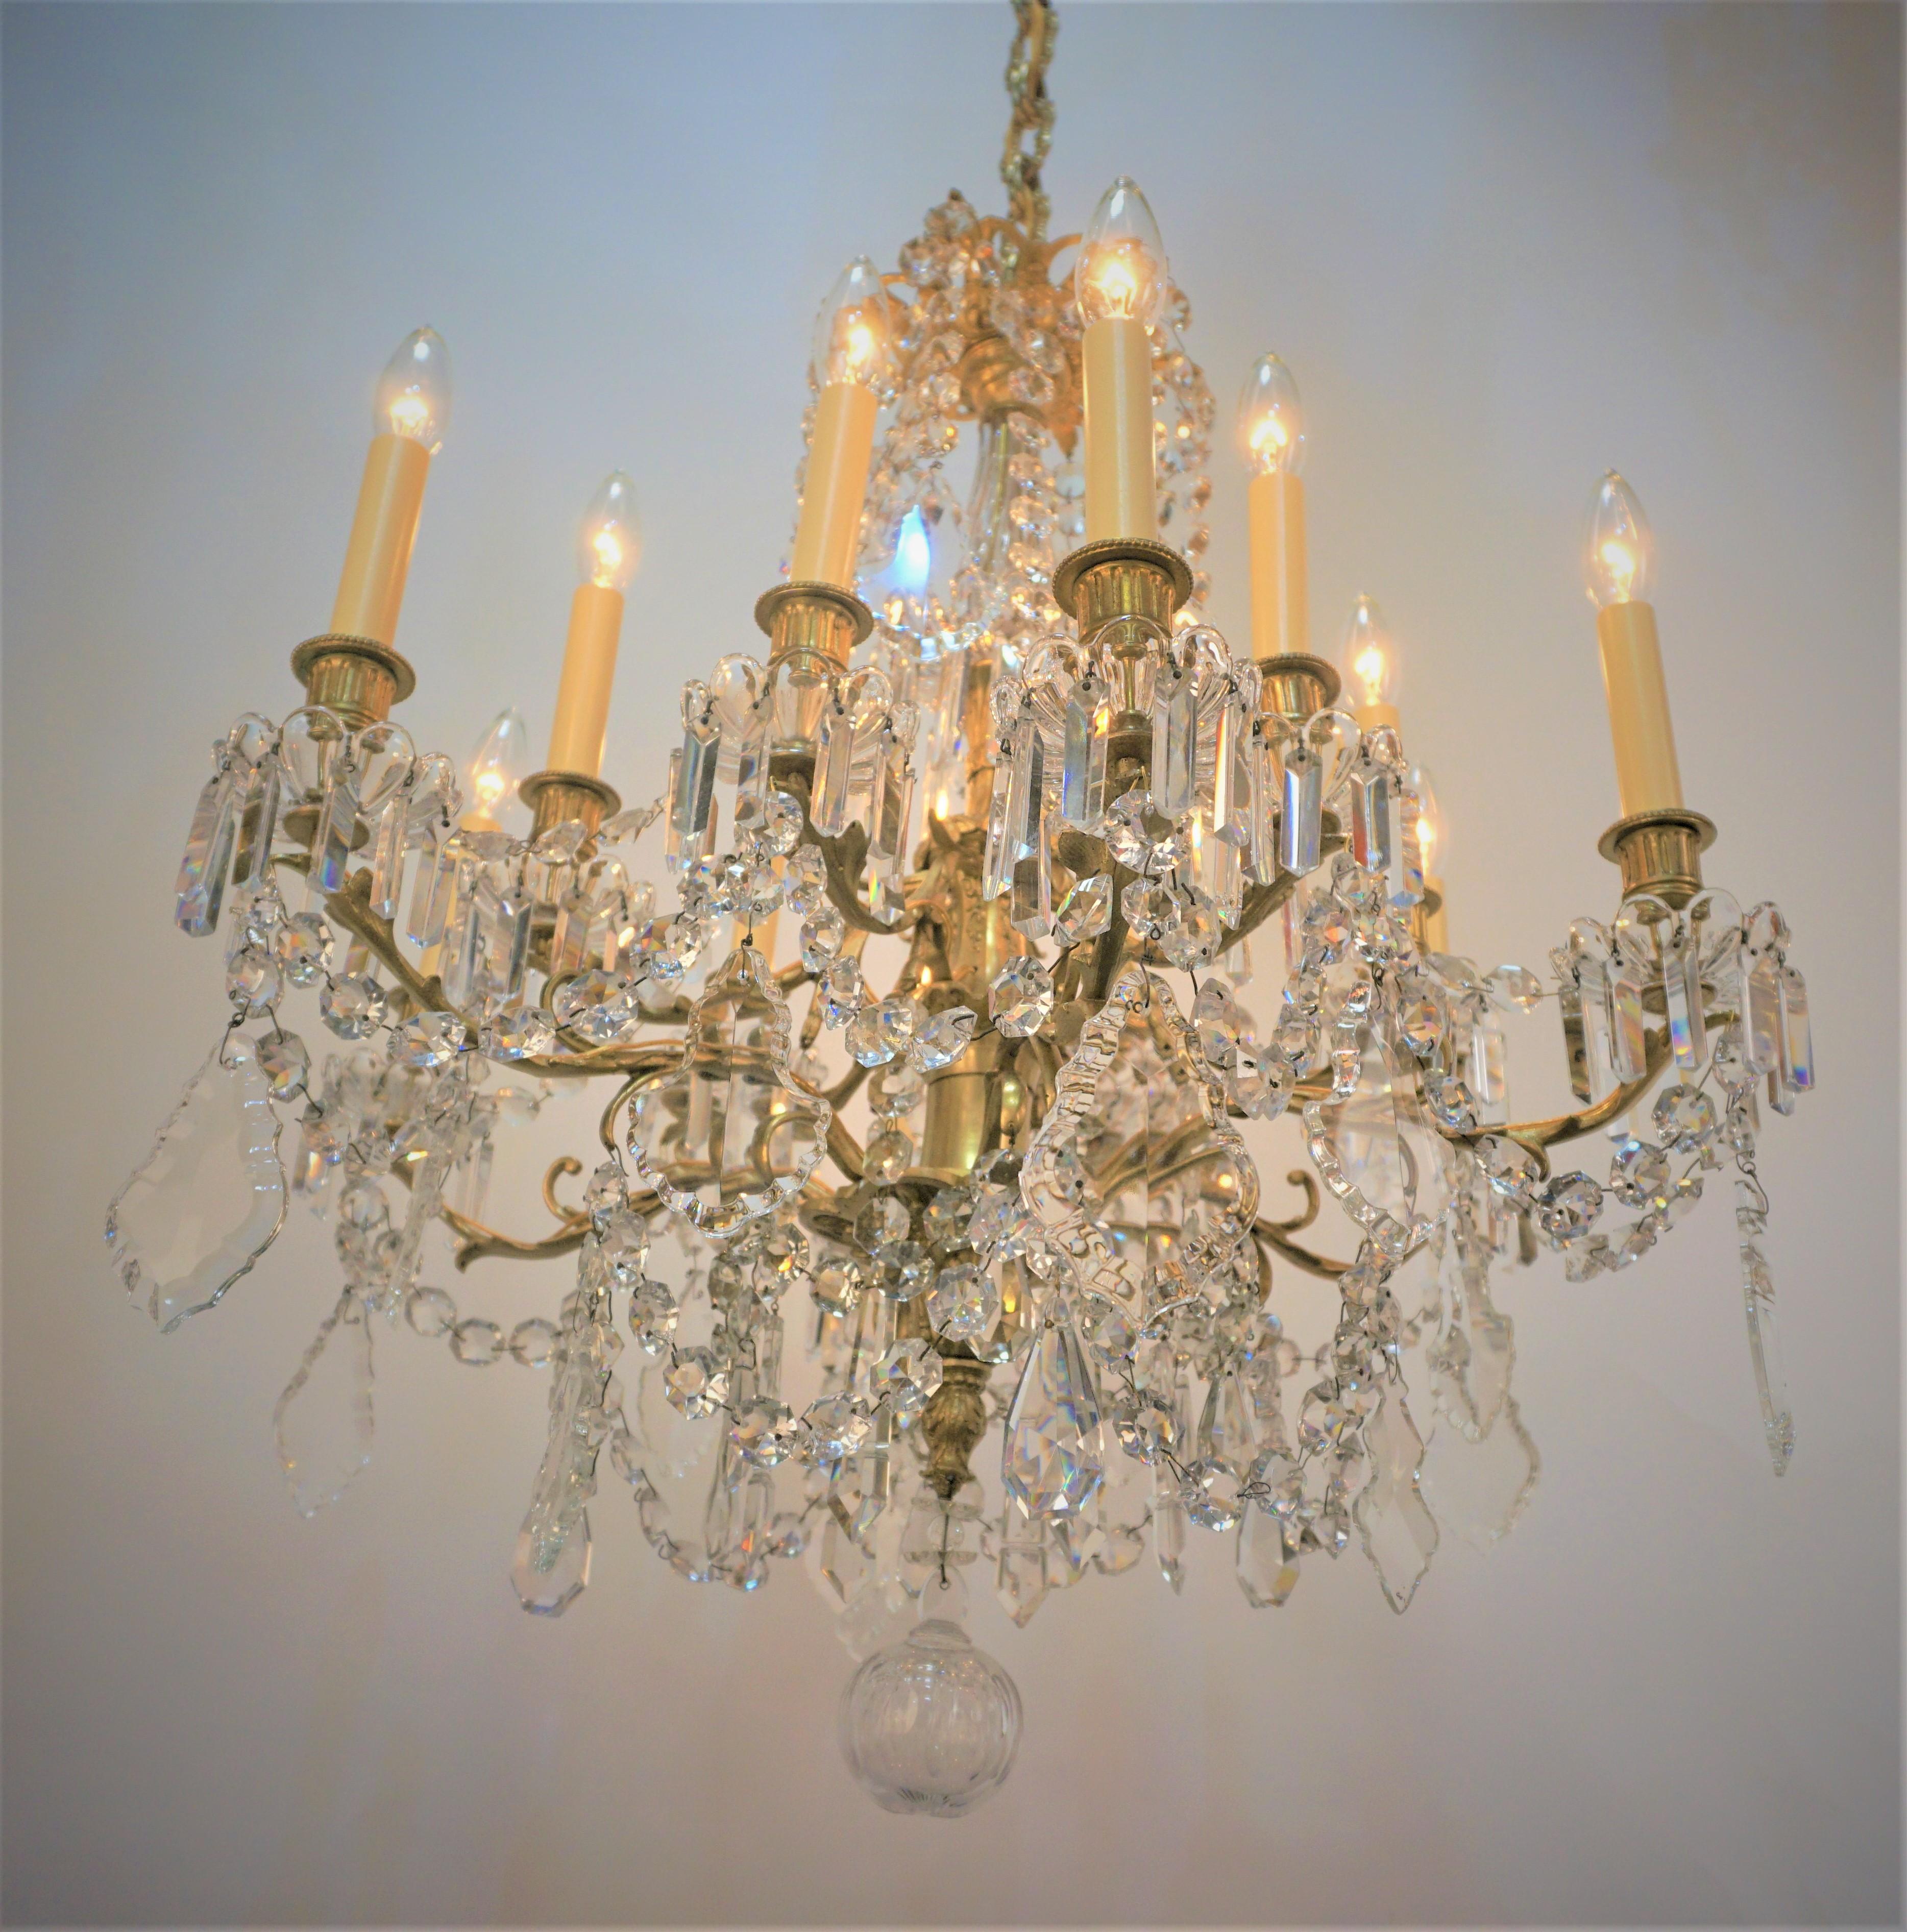 Elegant19th century twelve light Baccarat crystal and bronze chandelier.
Professionally electrified and ready for installation.
Measurement